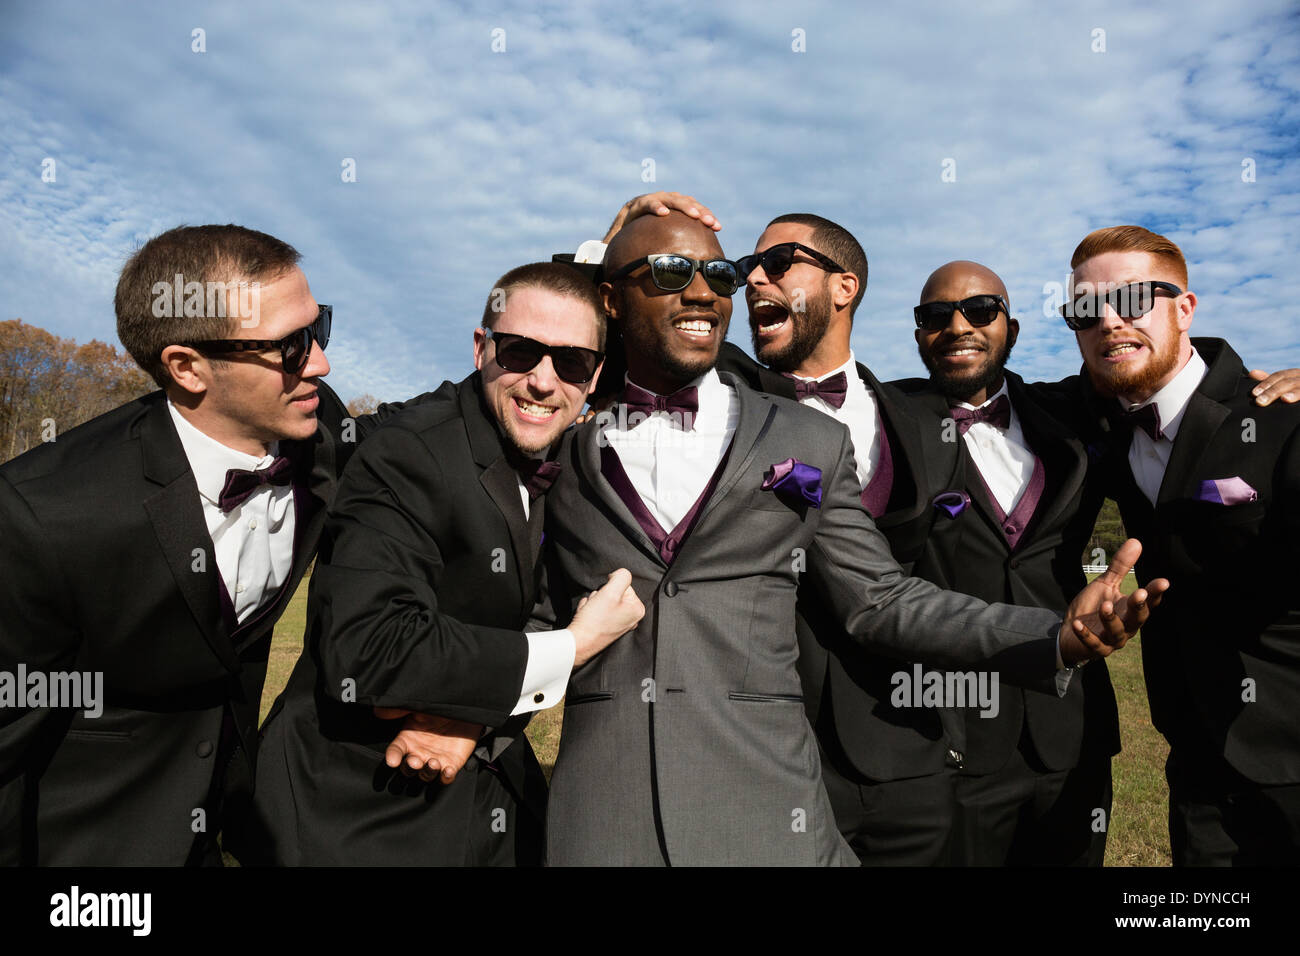 Groom and groomsmen posing for wedding pictures Stock Photo